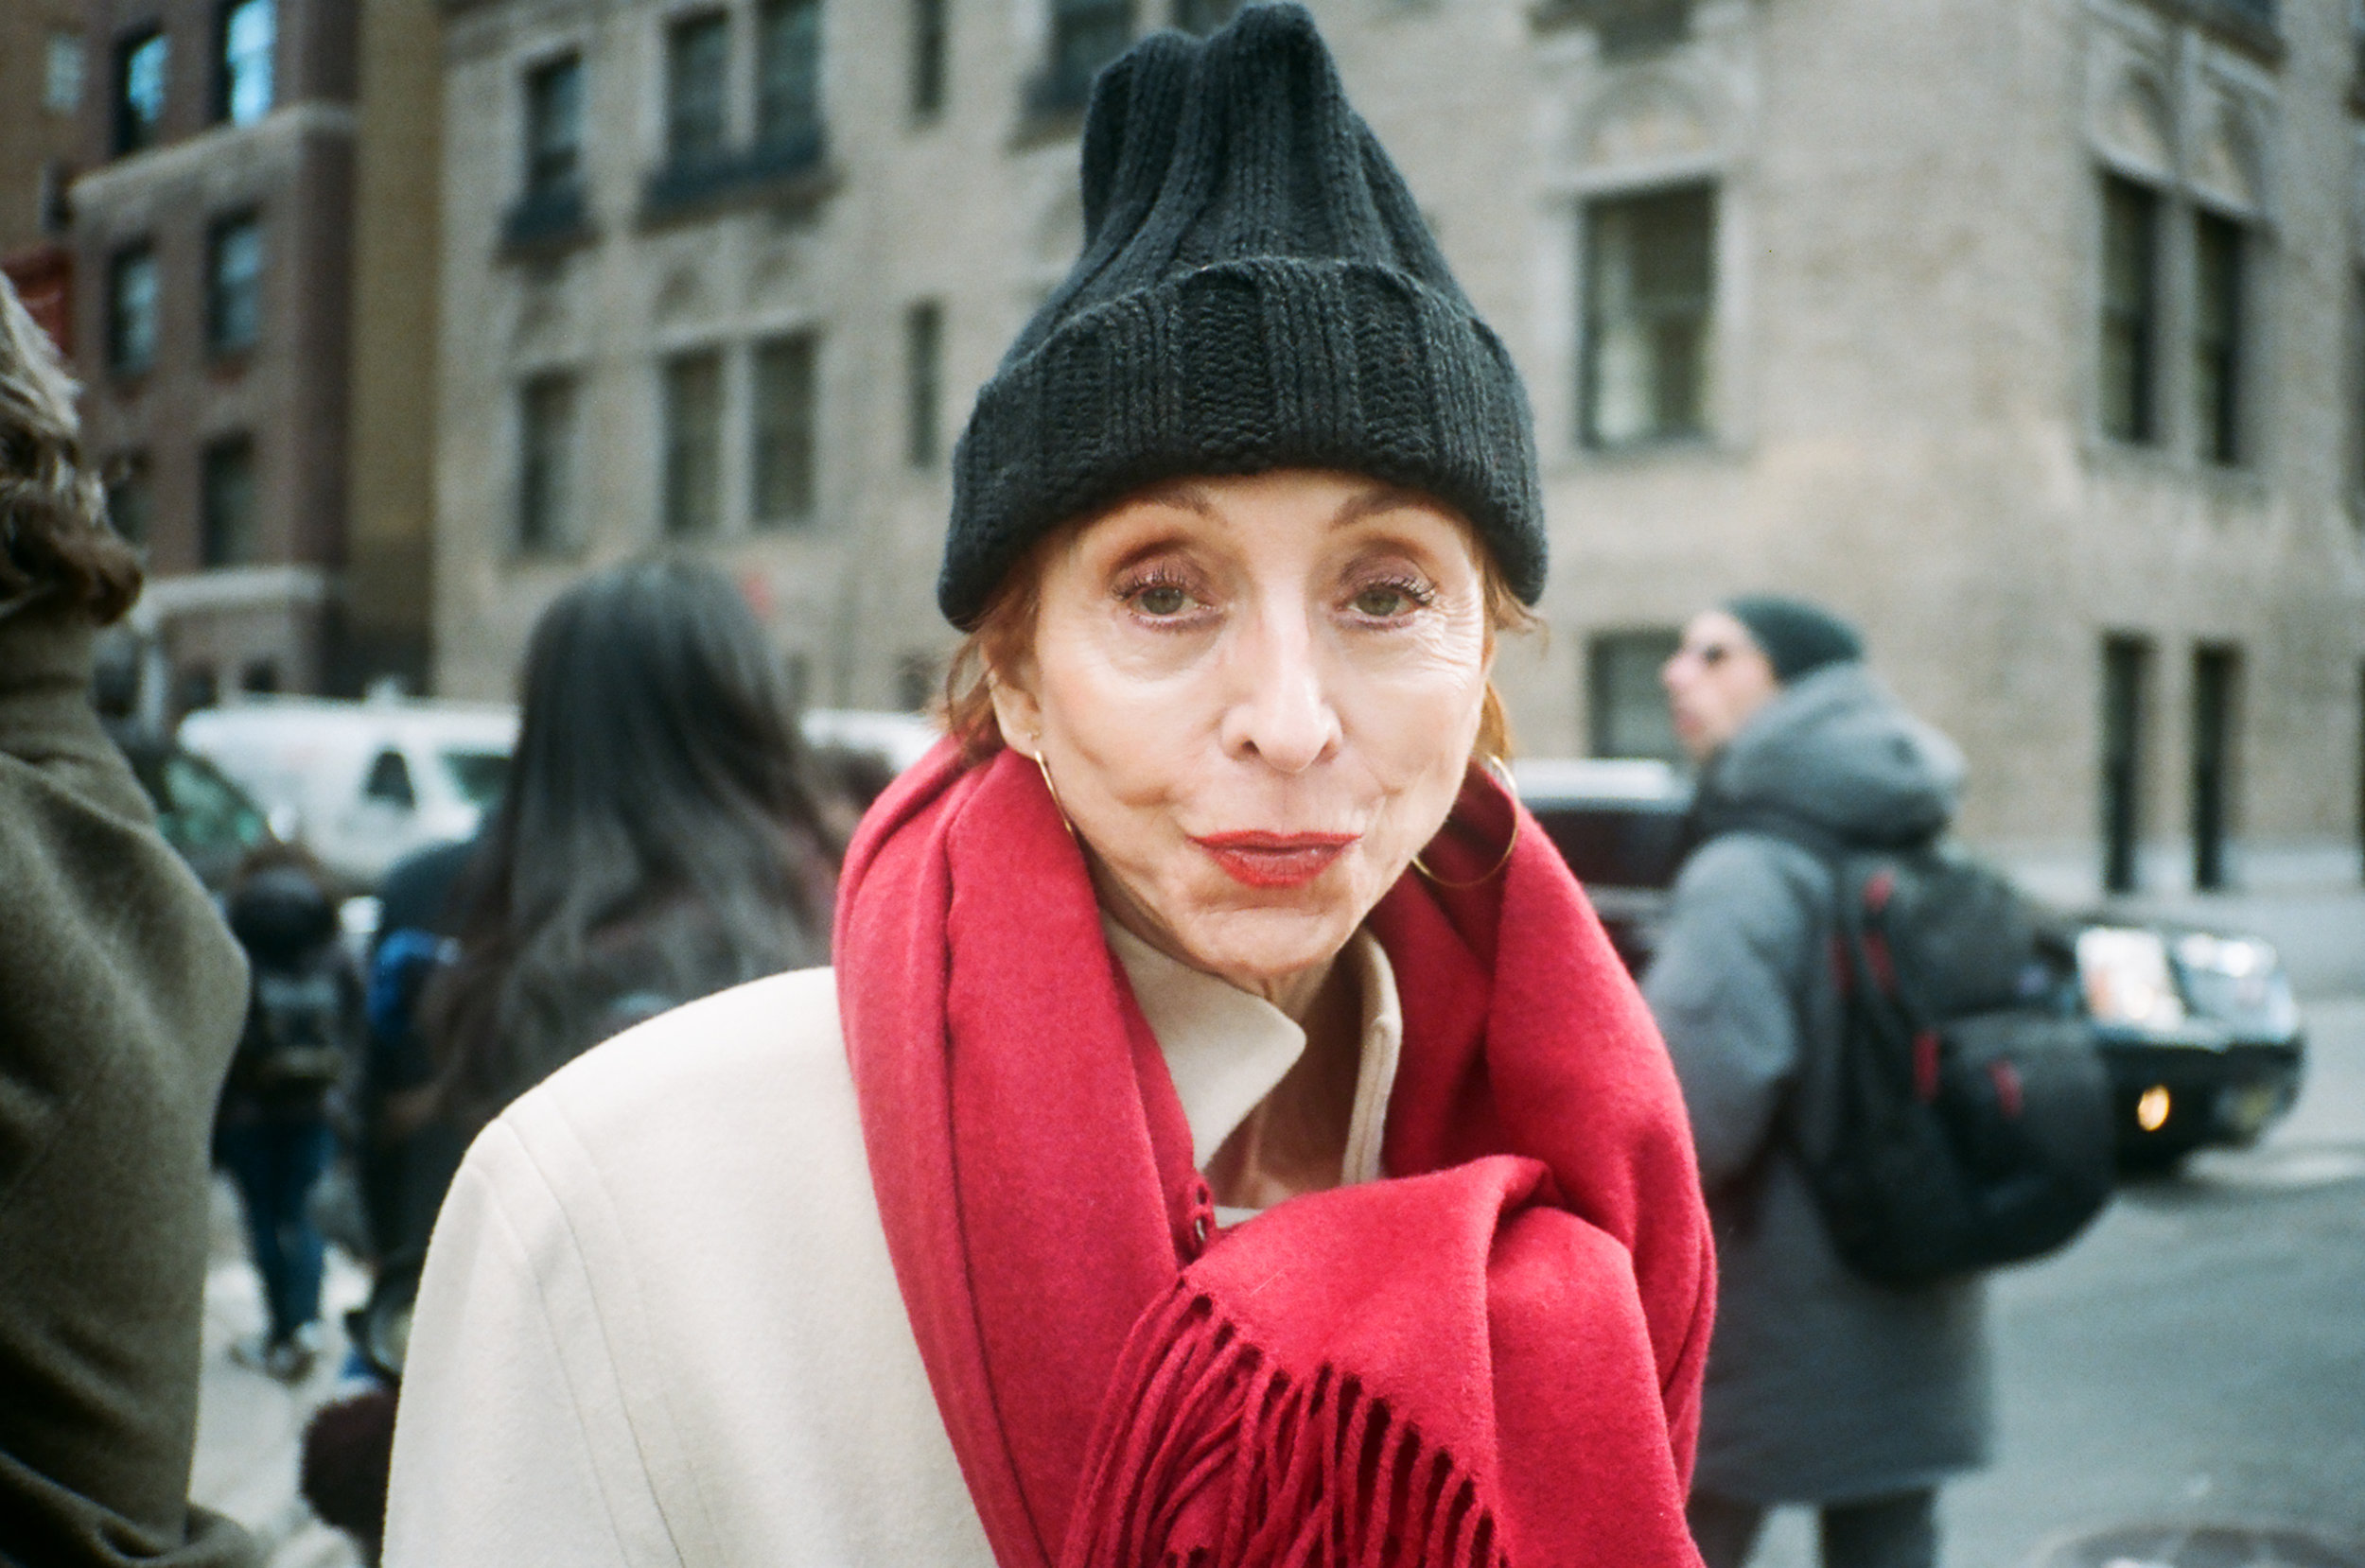 11 Lady in a Hat on Park Avenue.jpg